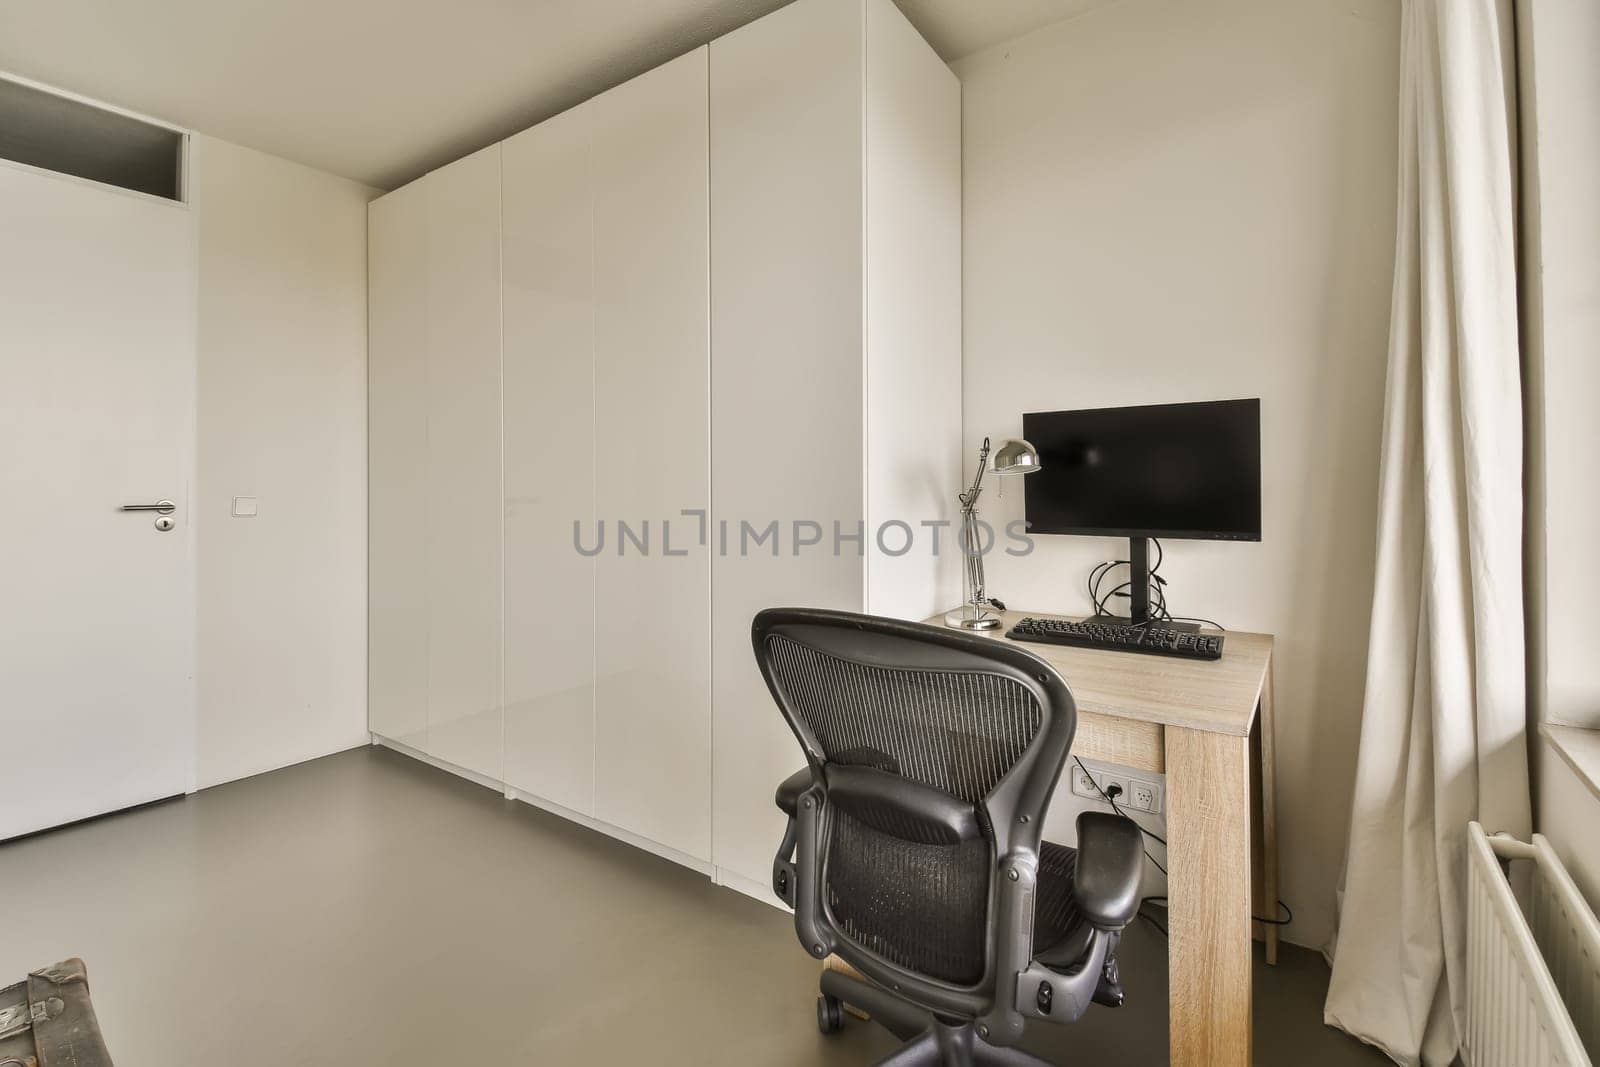 a room with an office chair, desk and television monitor on the wall in the room is very white color